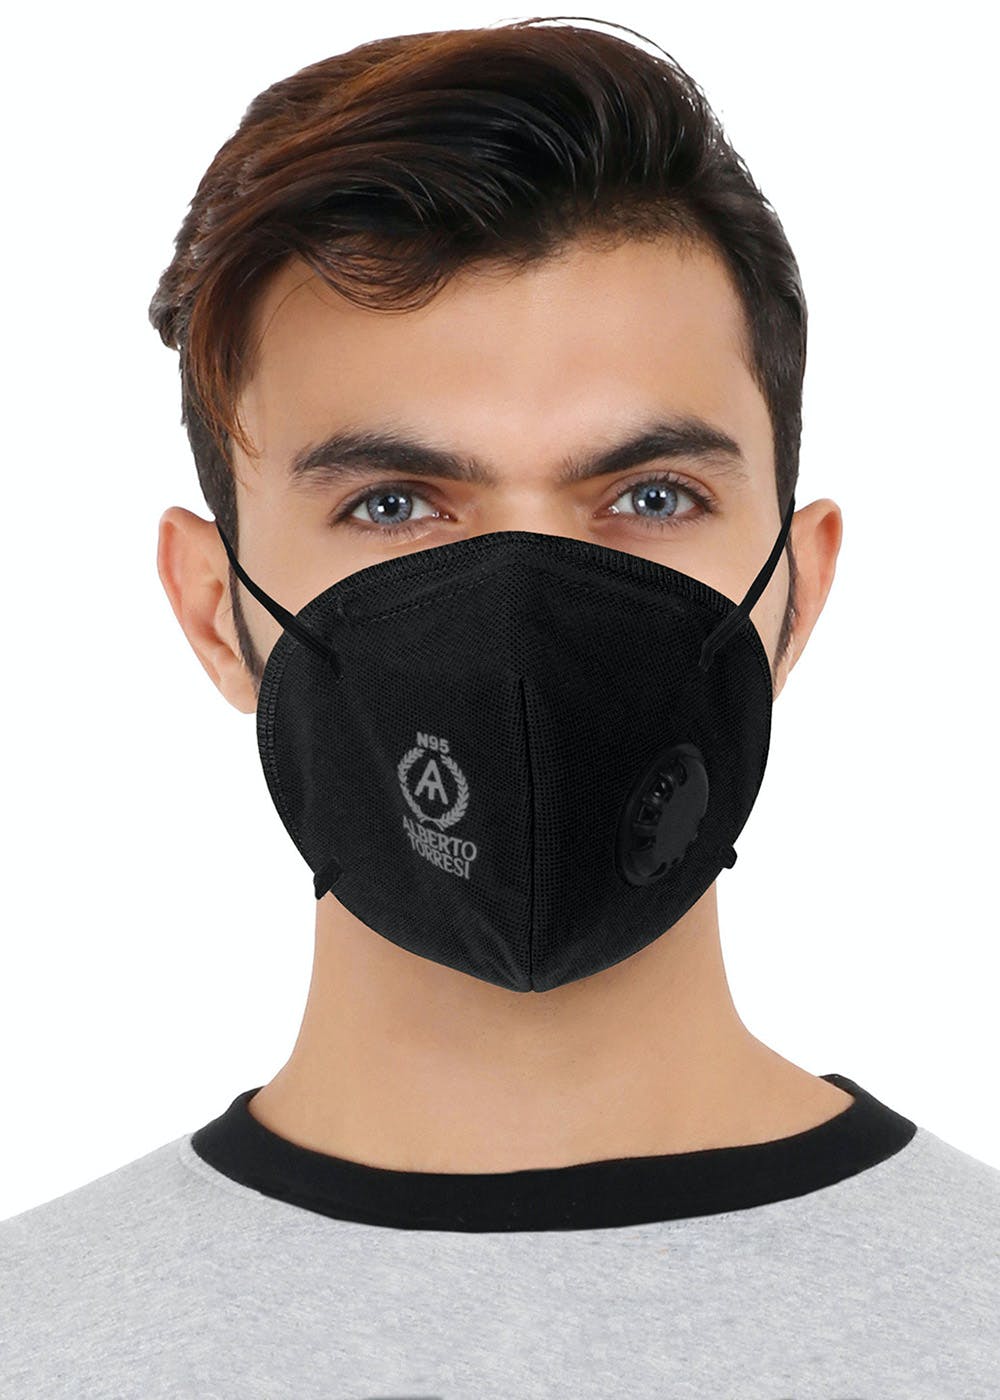 N95 Particulate Respirator Mask For Protection (Pack Of 1)